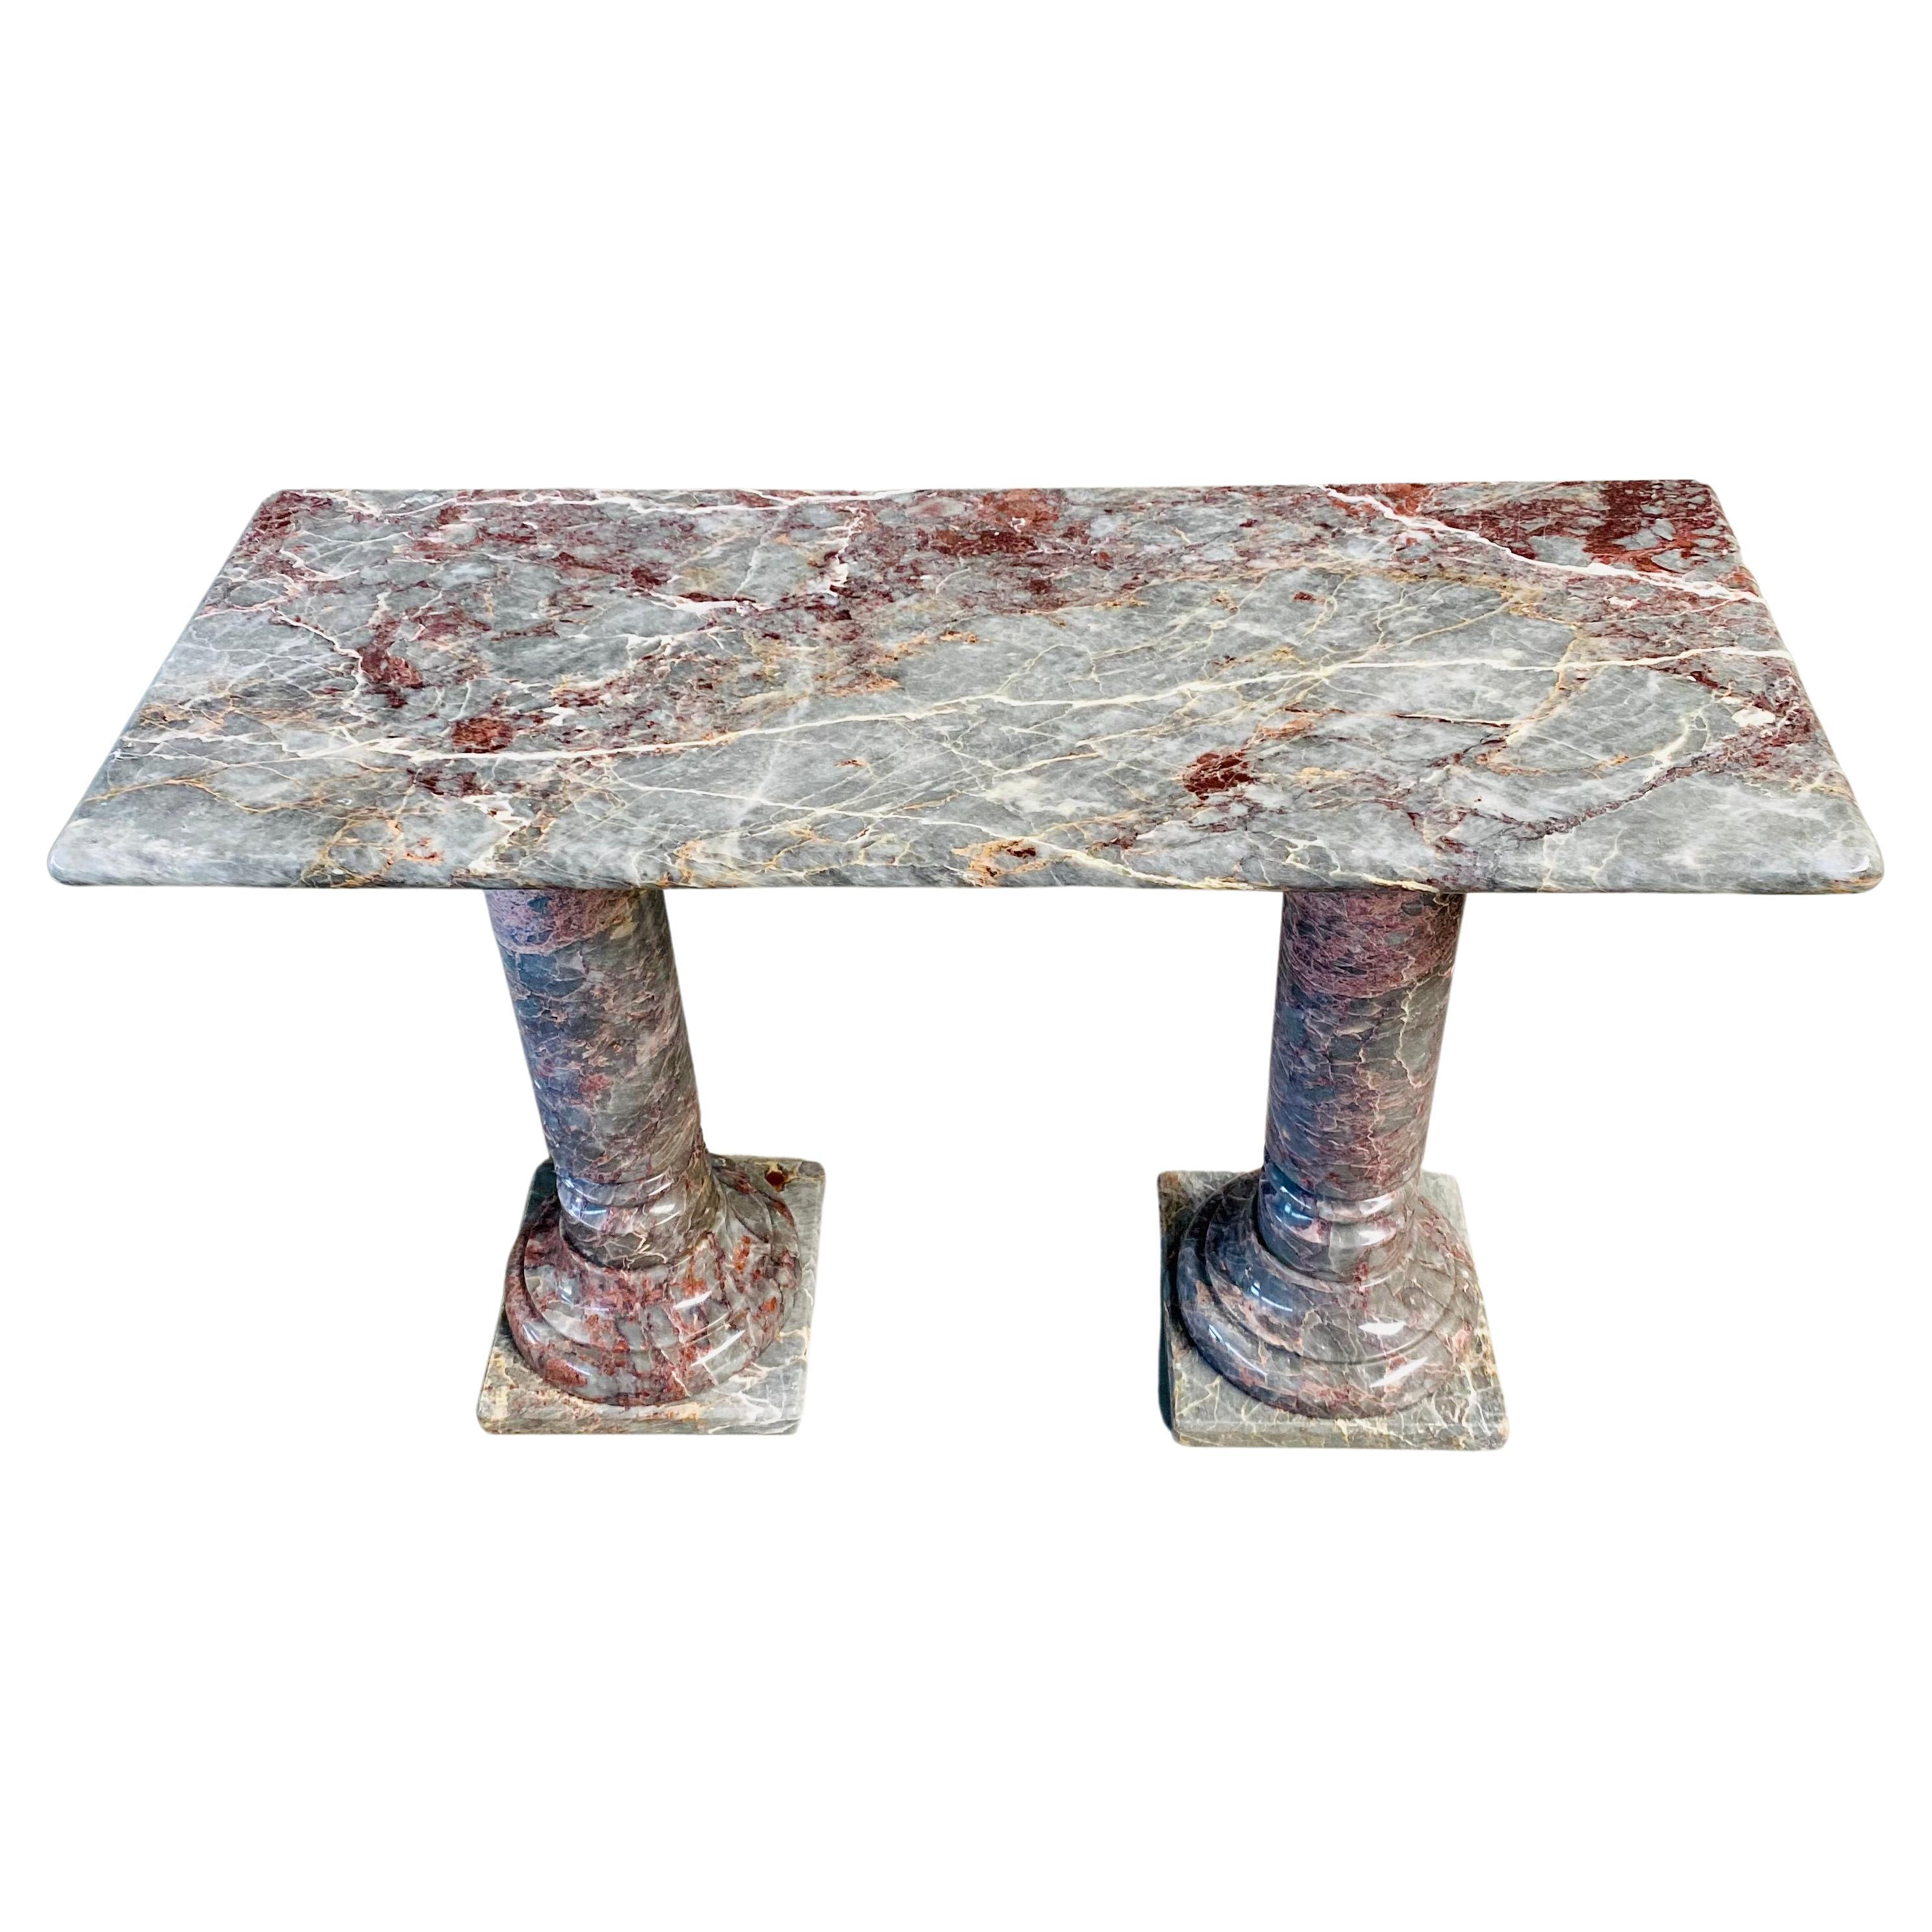 Solid Polished Salome Marble Console Table, Italy, 1980s